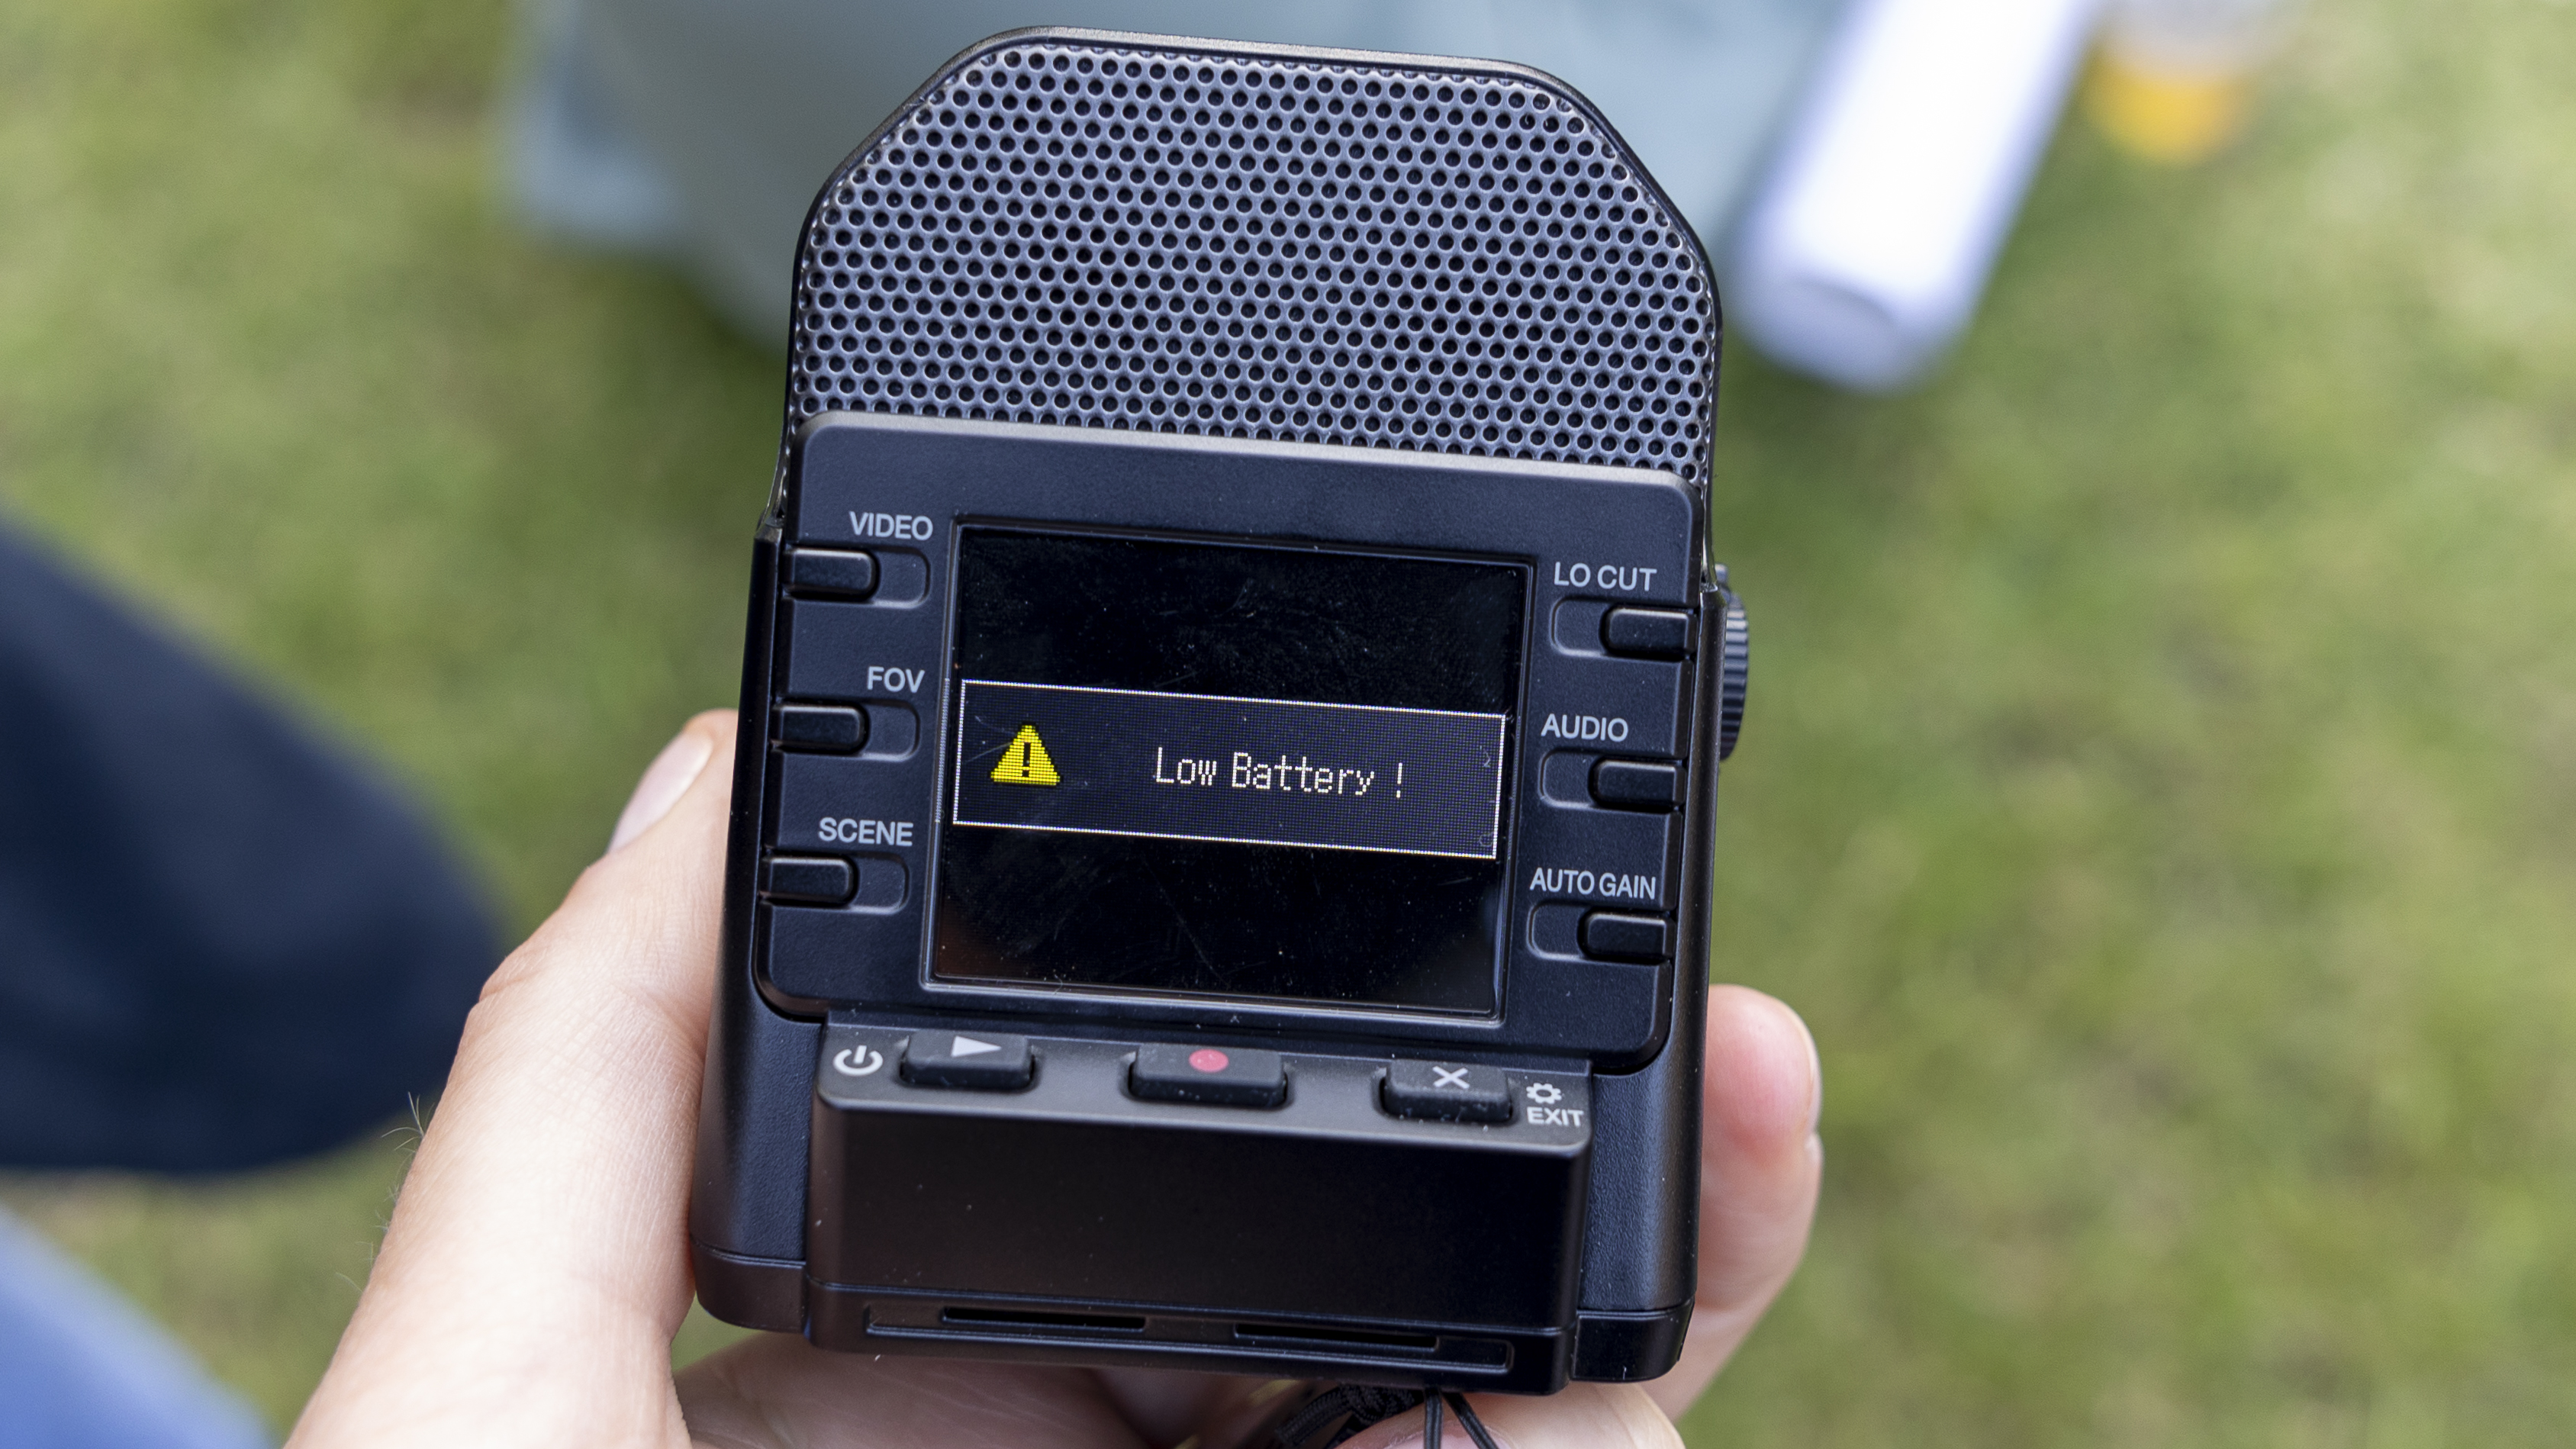 The Zoom Q2n-4K LCD screen showing a low battery warning